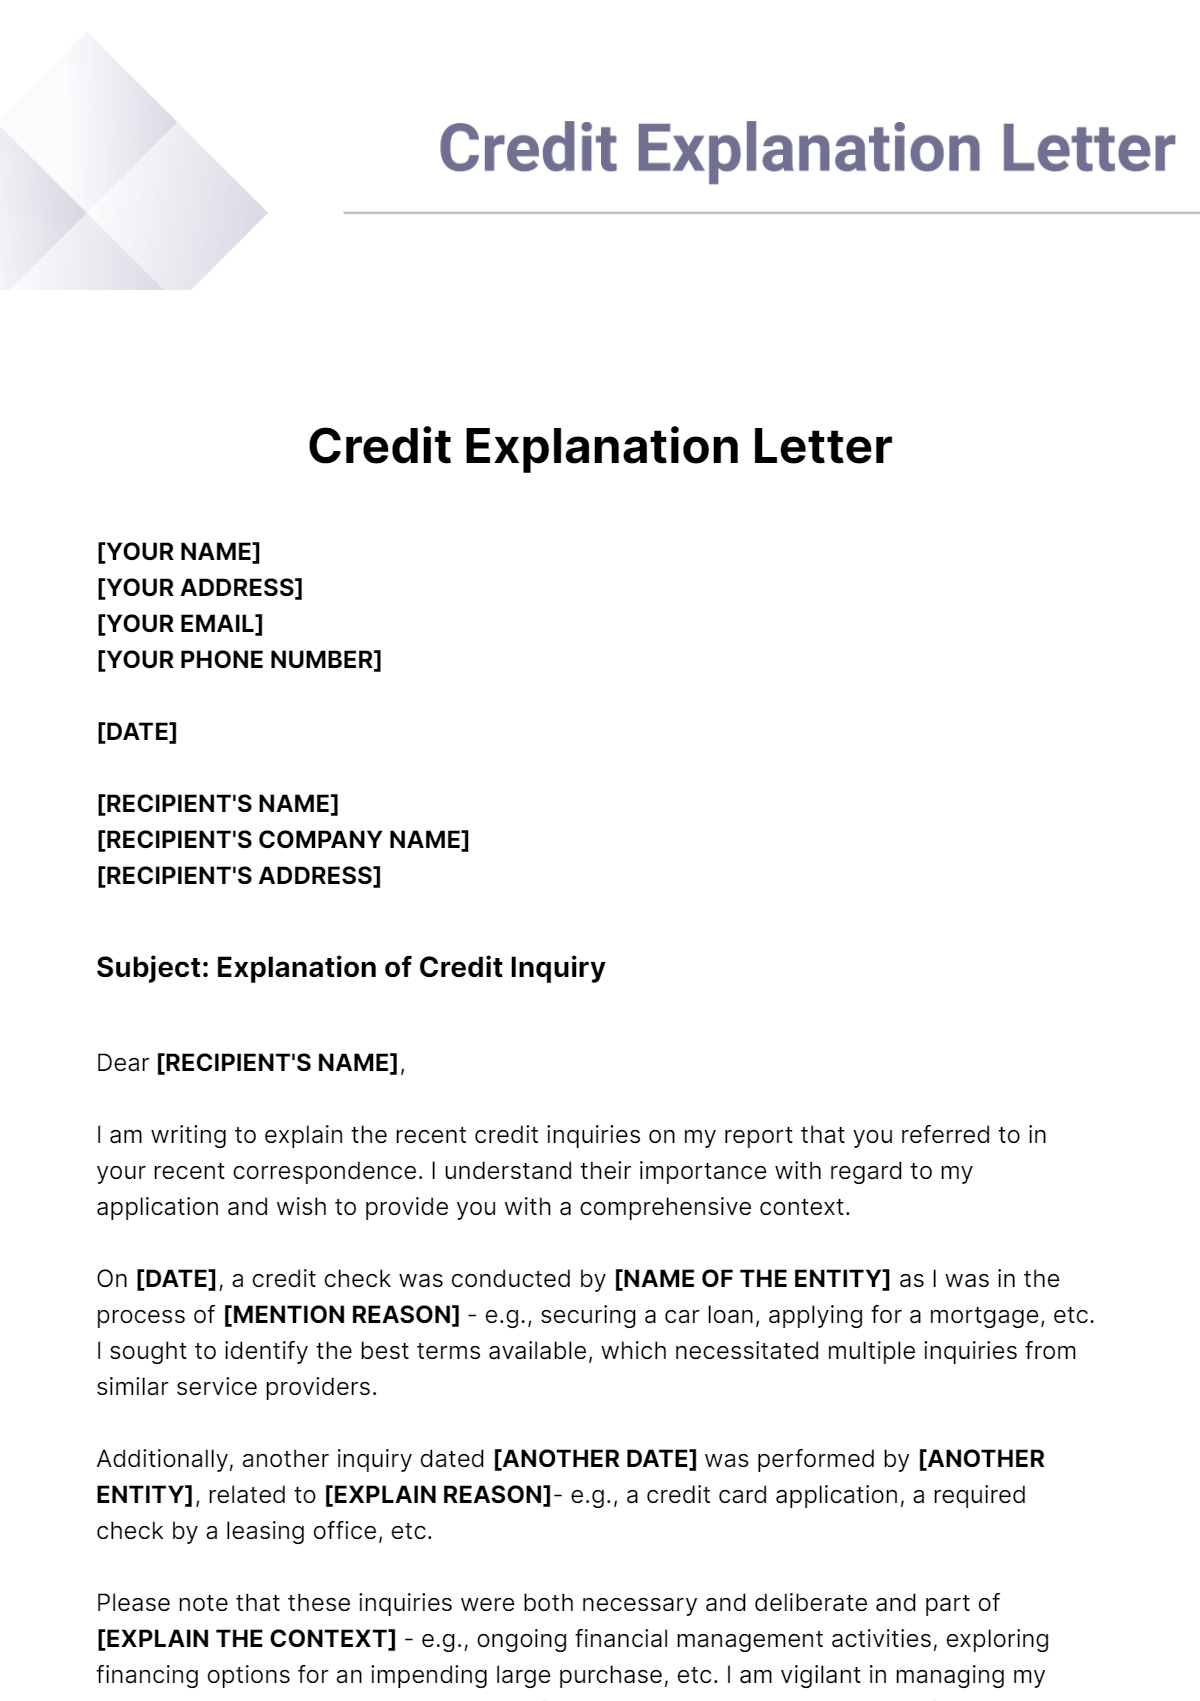 Credit Explanation Letter Template